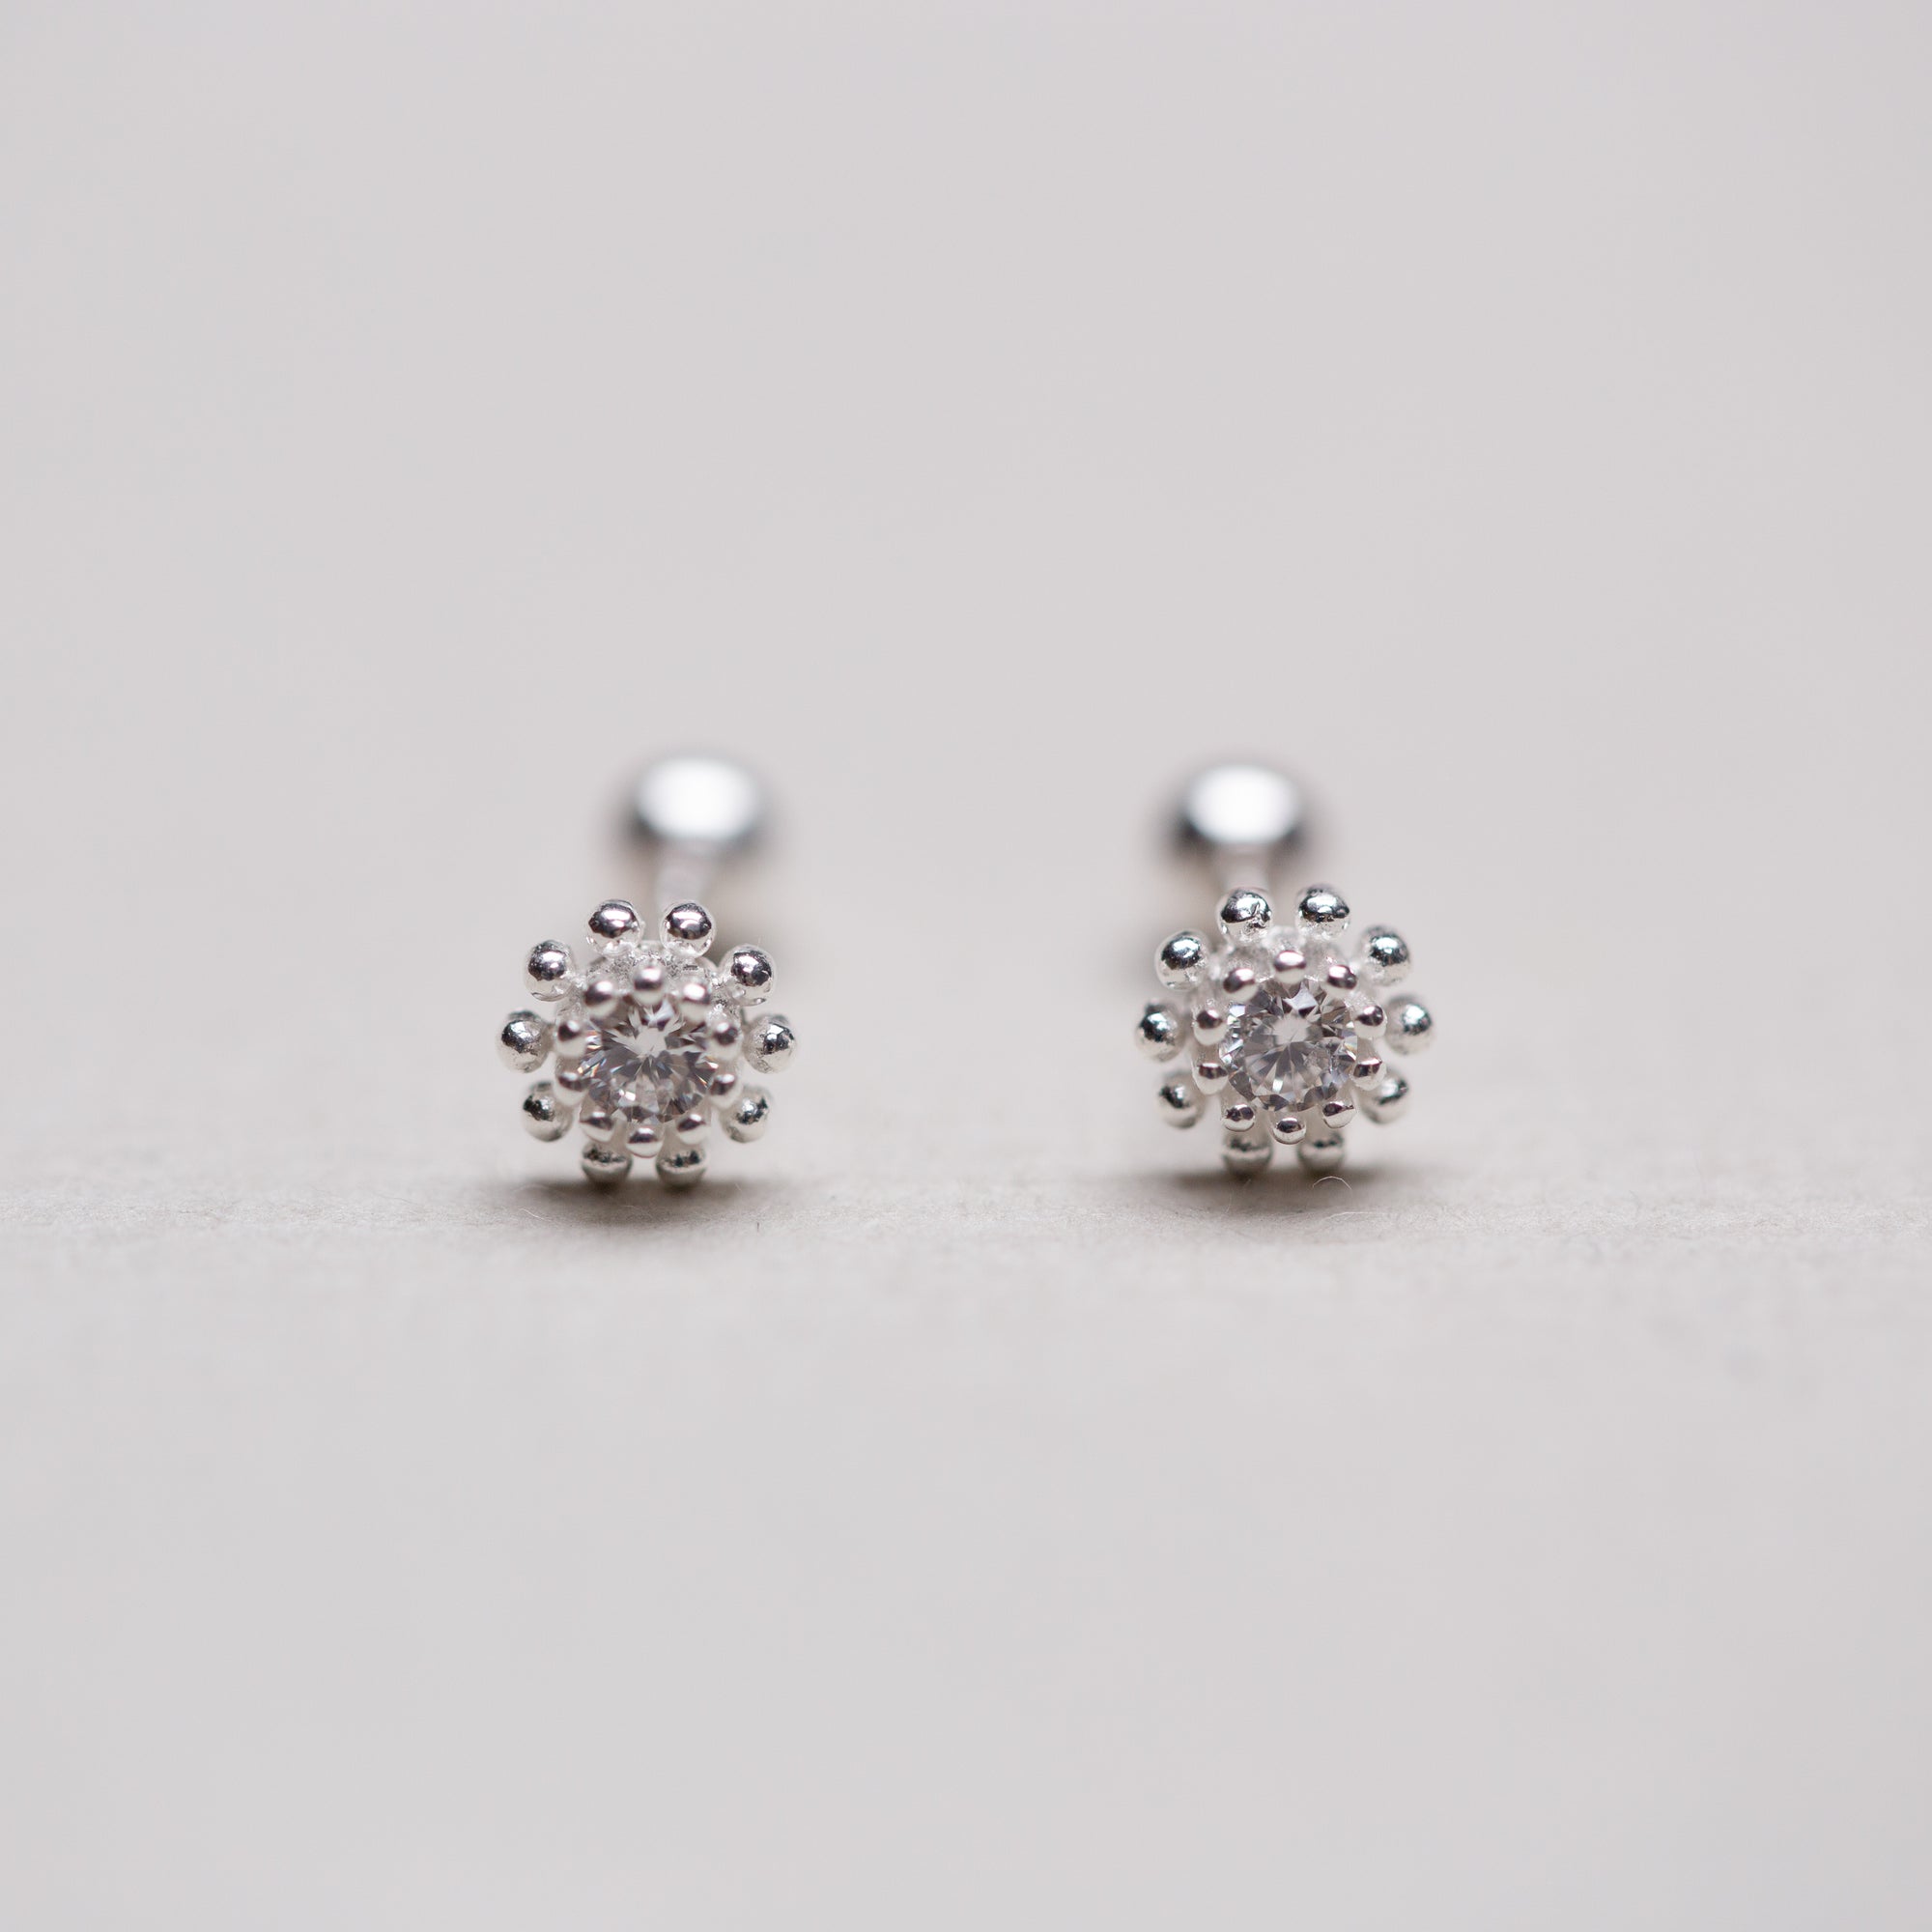 Silver Bead Flower Stud Cartilage Earrings with Cubic Zirconia